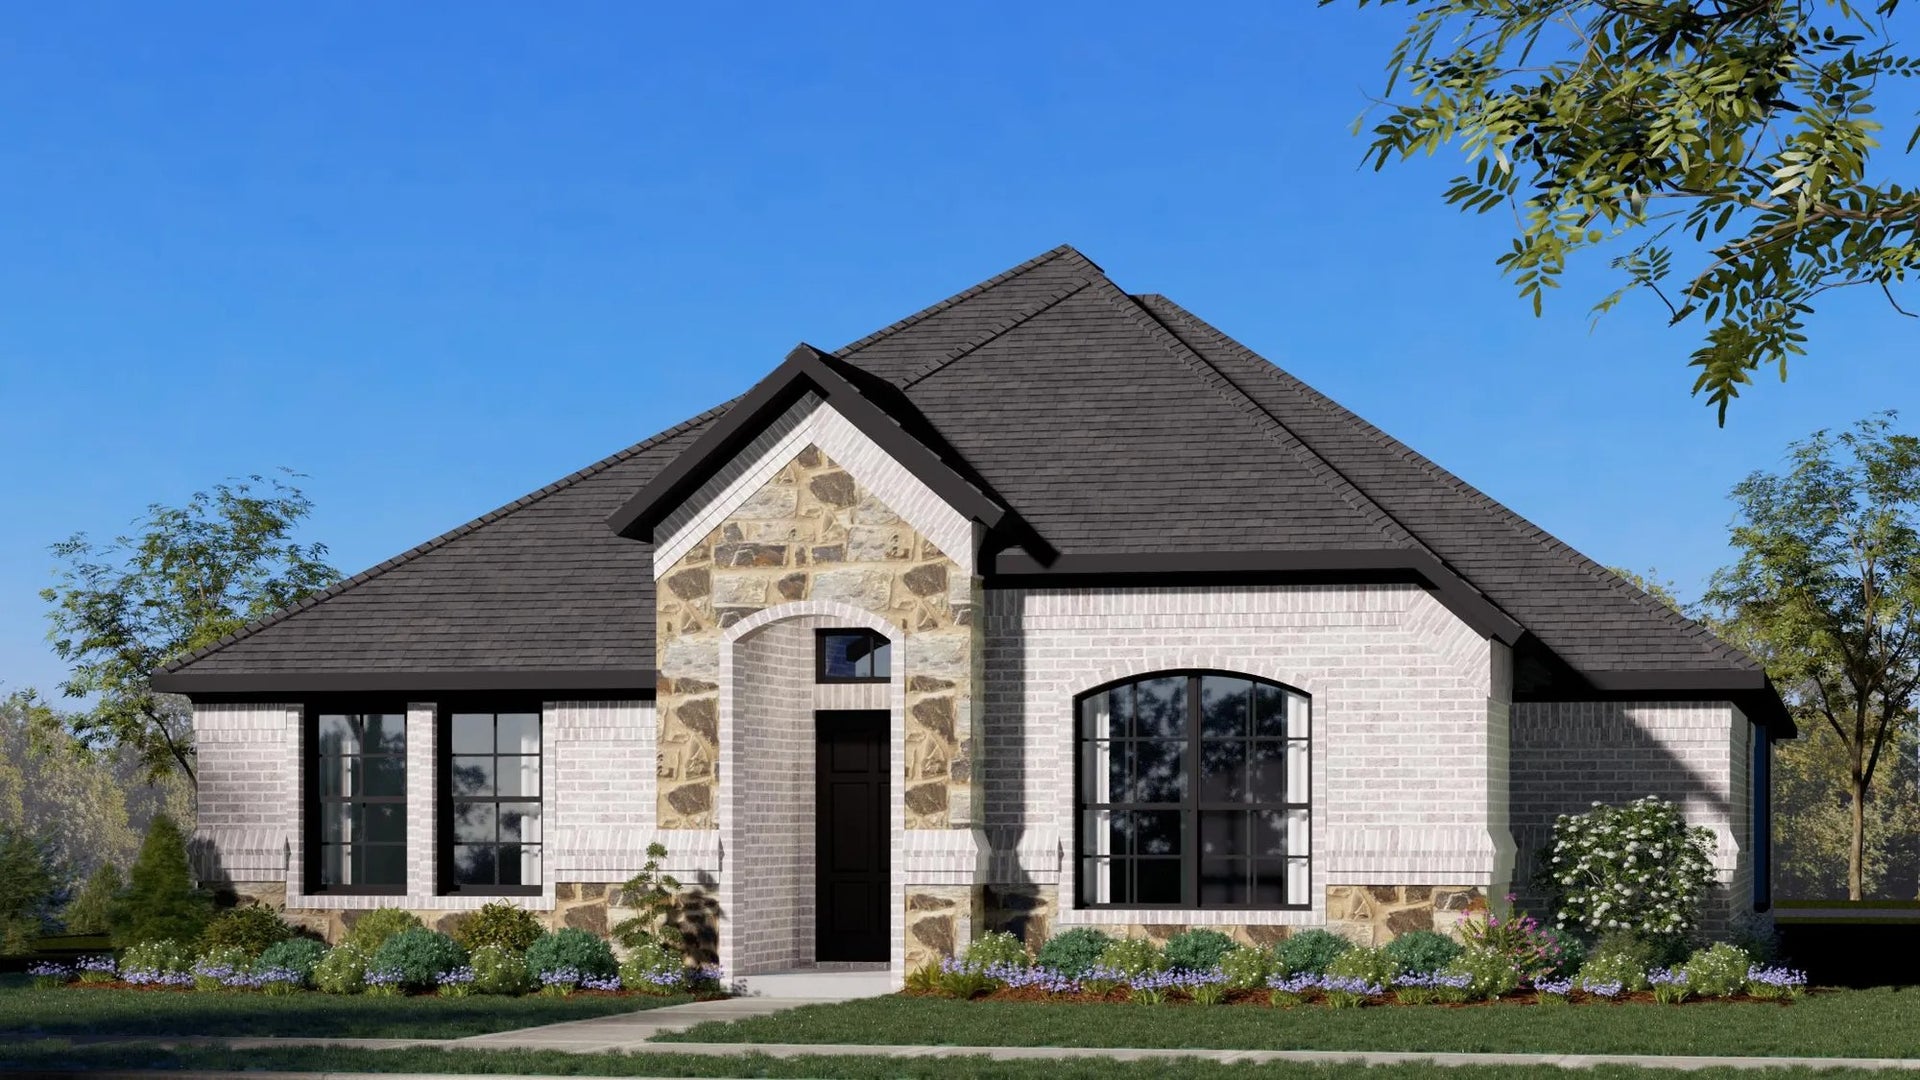 1568 C Stone. 3br New Home in Heartland, TX